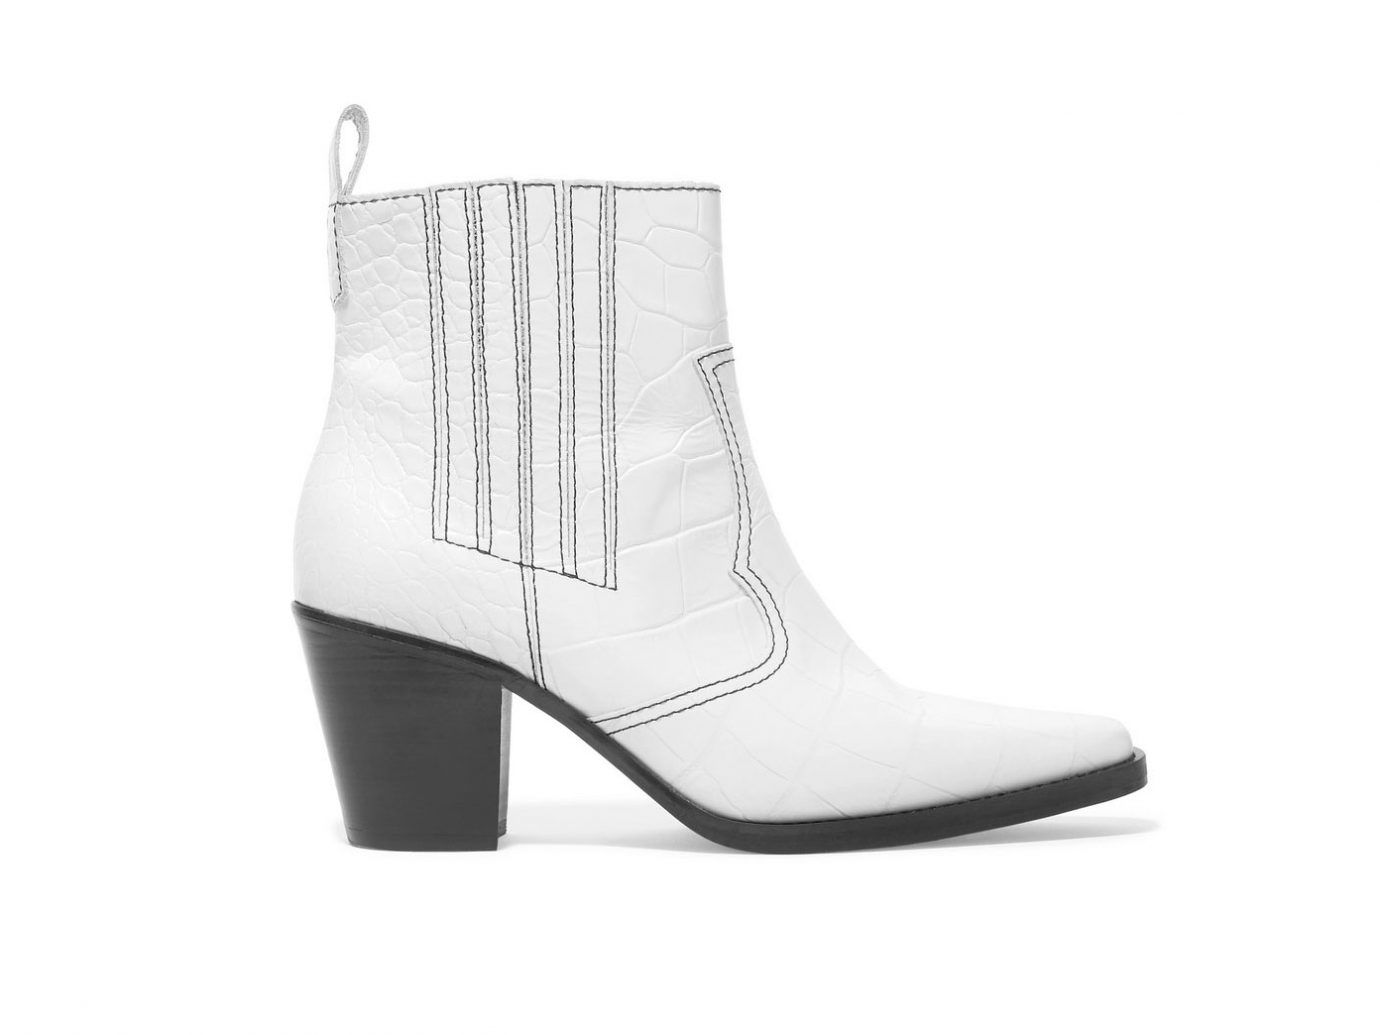 Ganni Callie Croc-effect Leather Ankle Boots